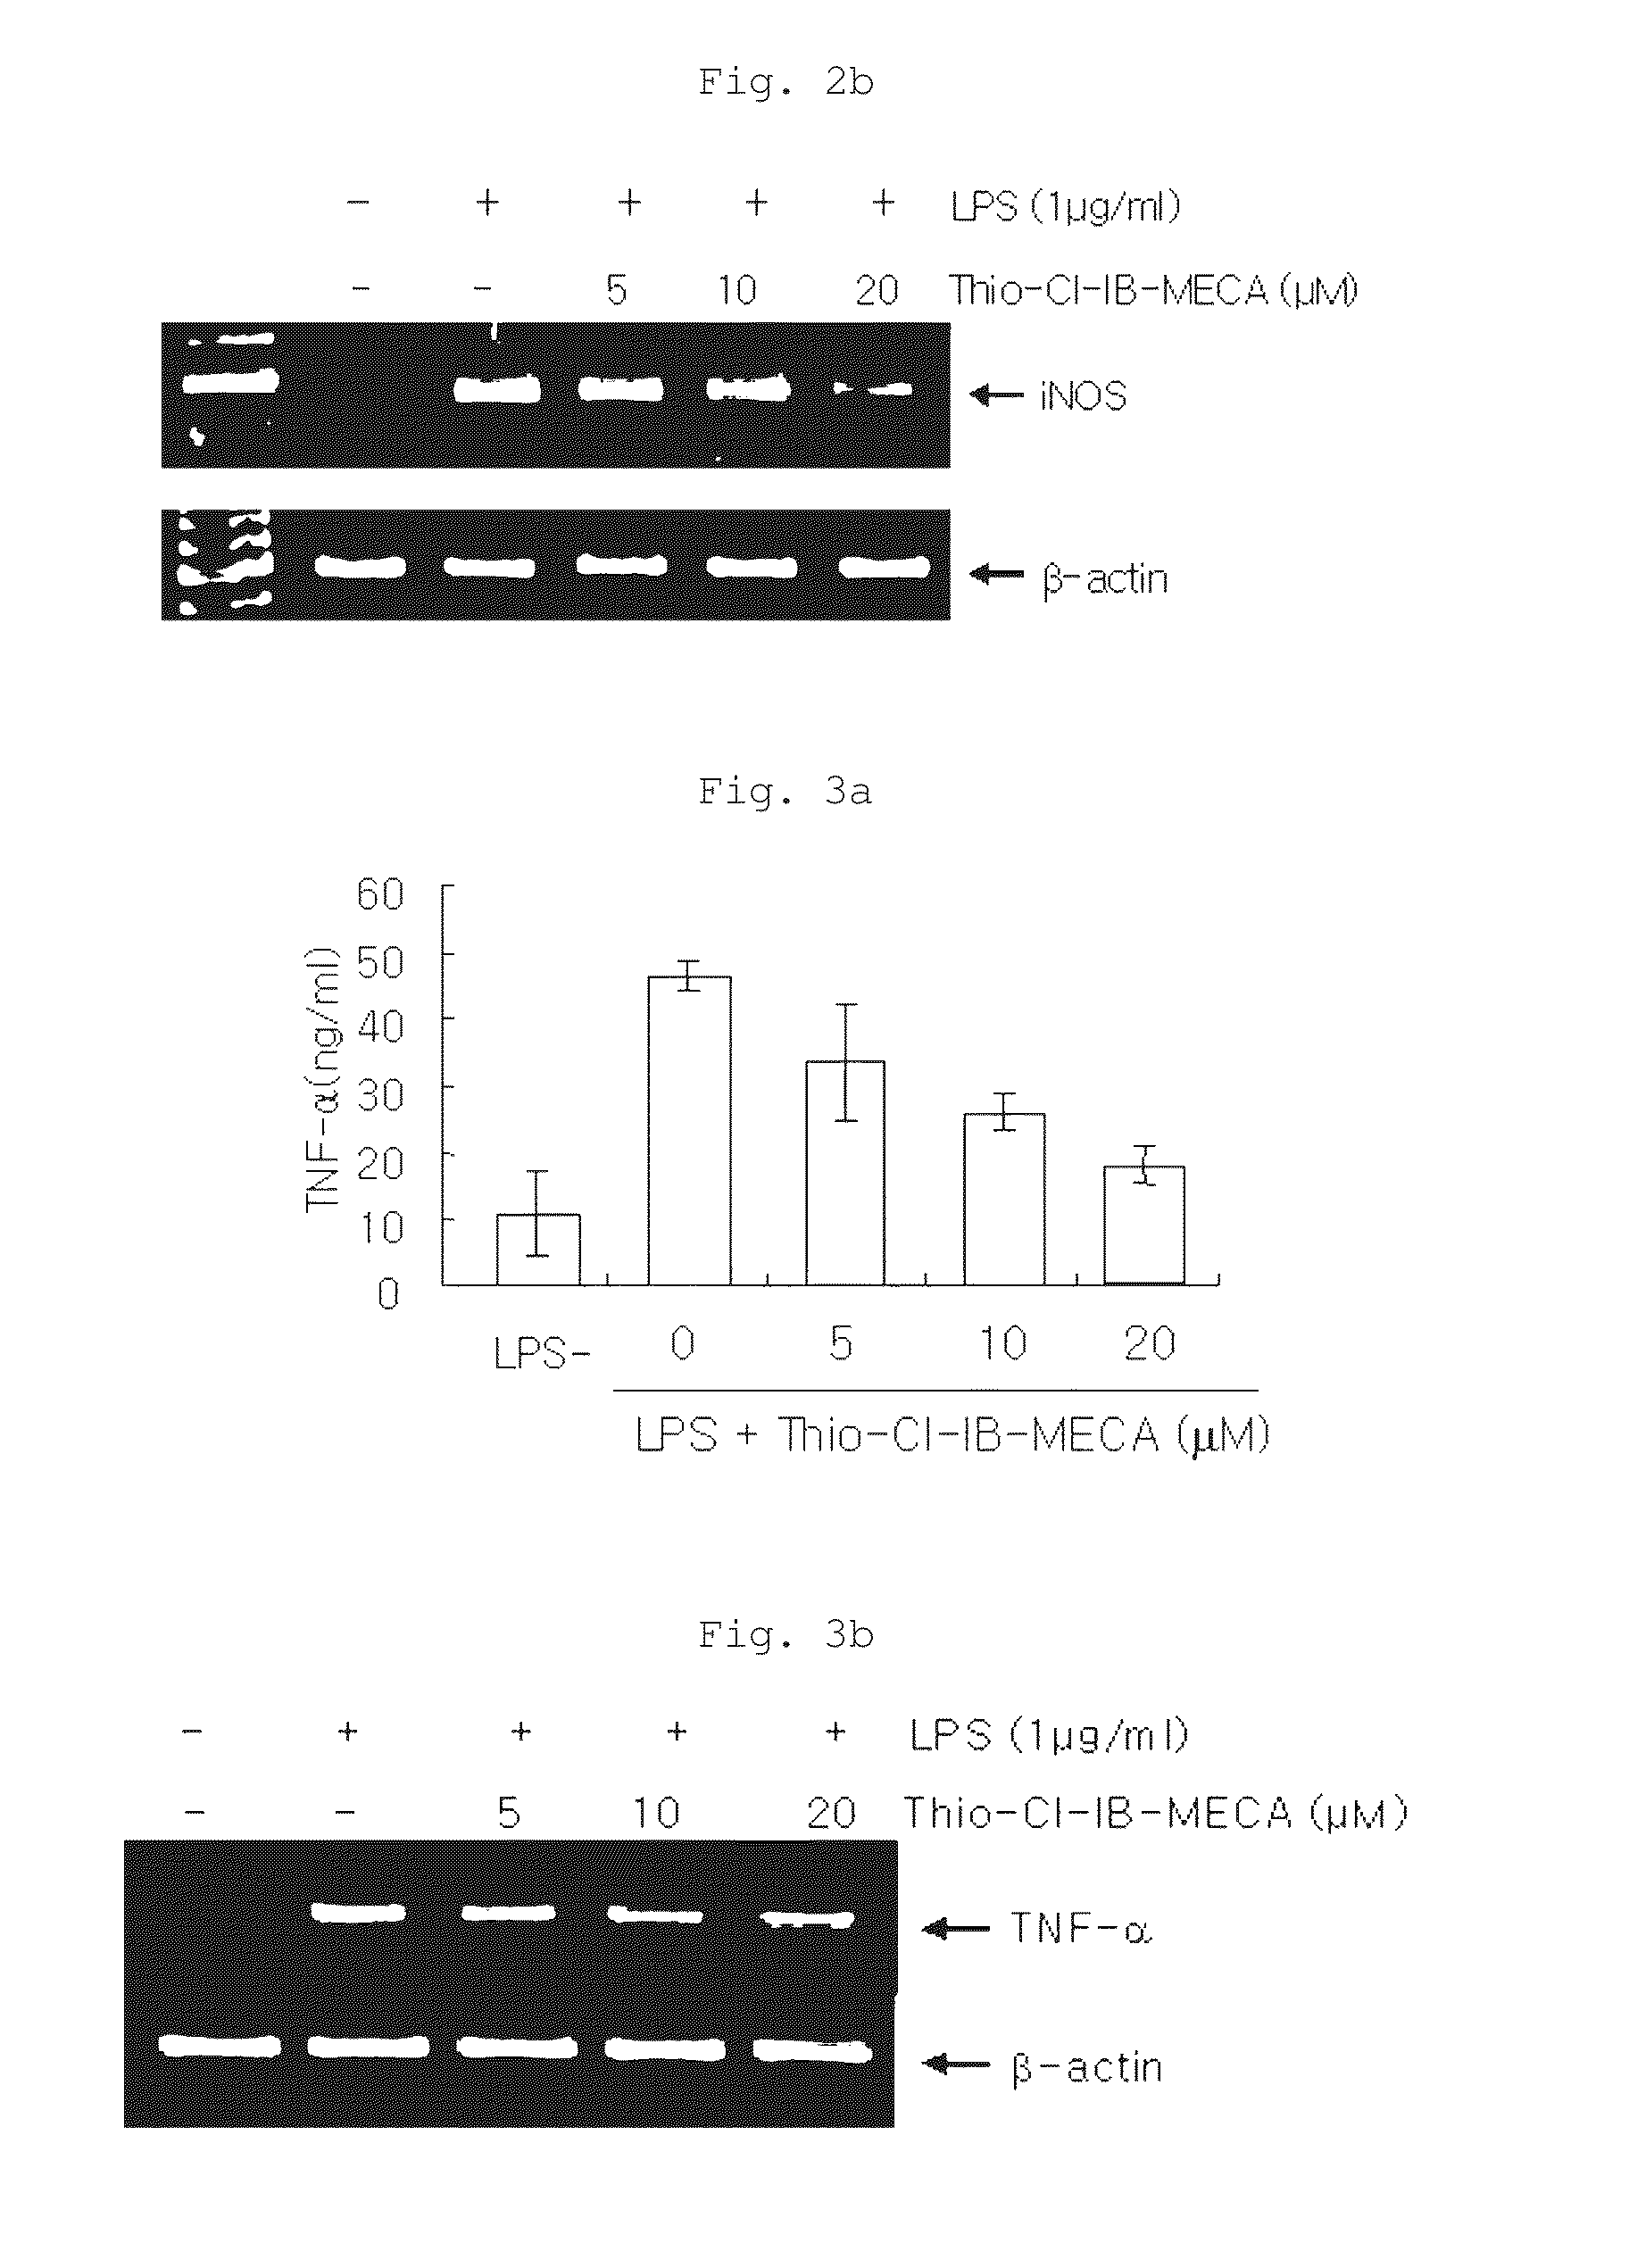 Method for treating prostate cancer by use of pharmaceutical composition containing a3 adenosine receptor agonist